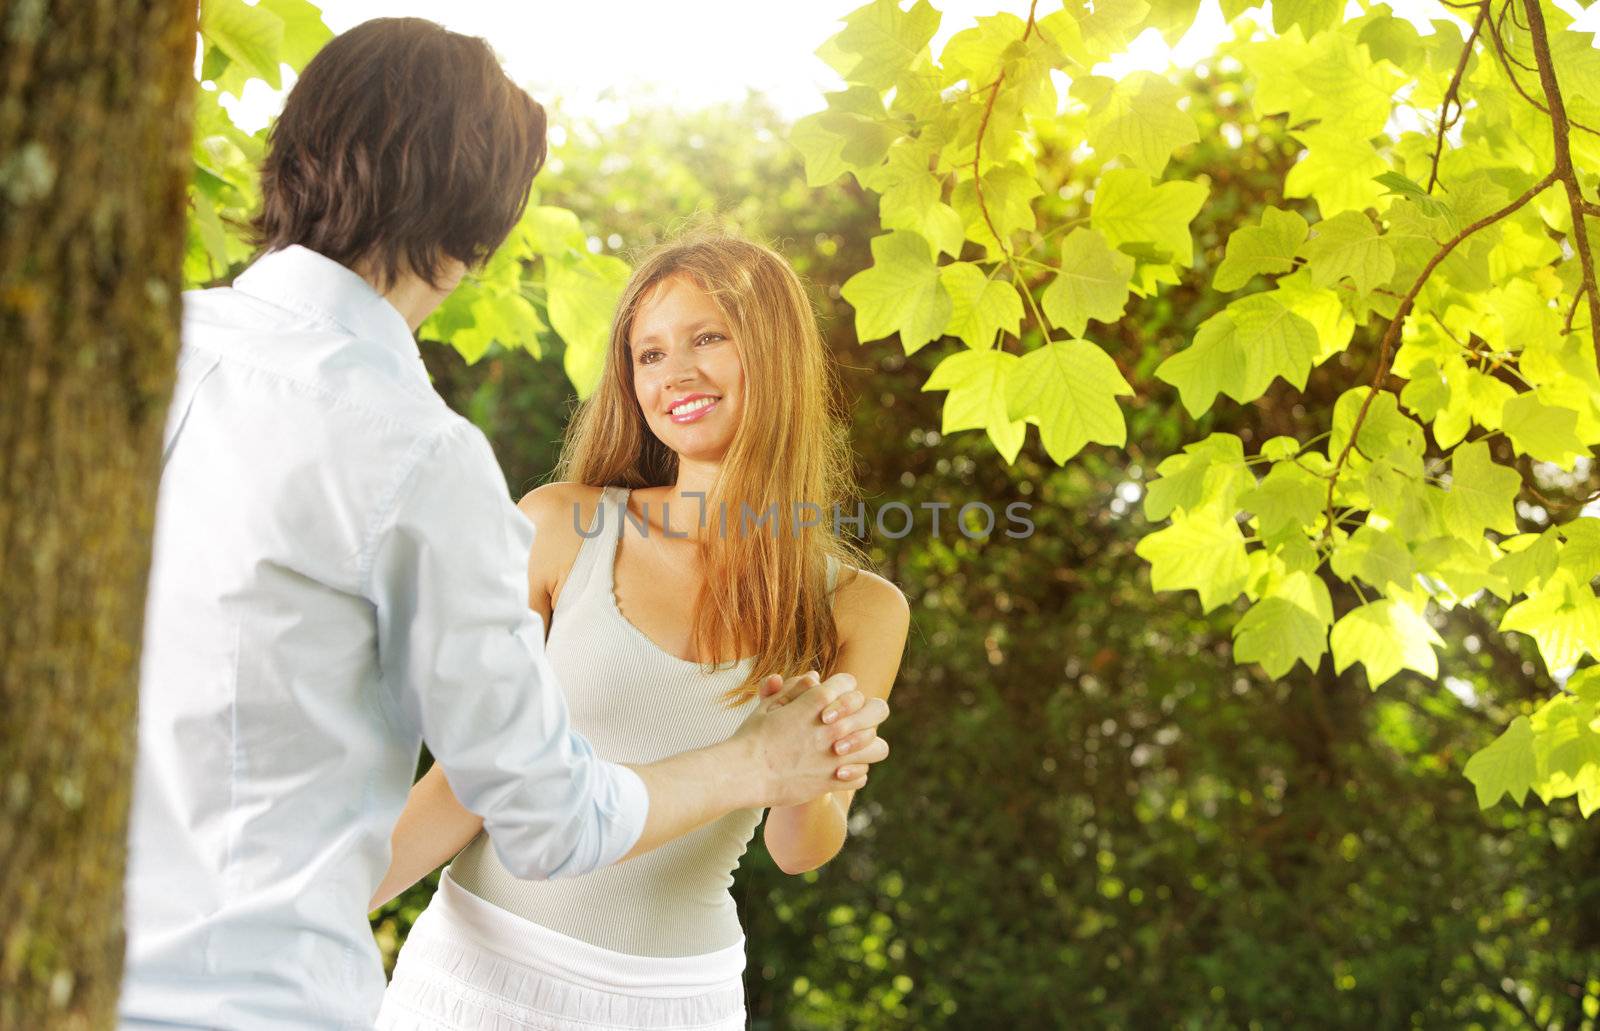 a young couple in love having fun in the park